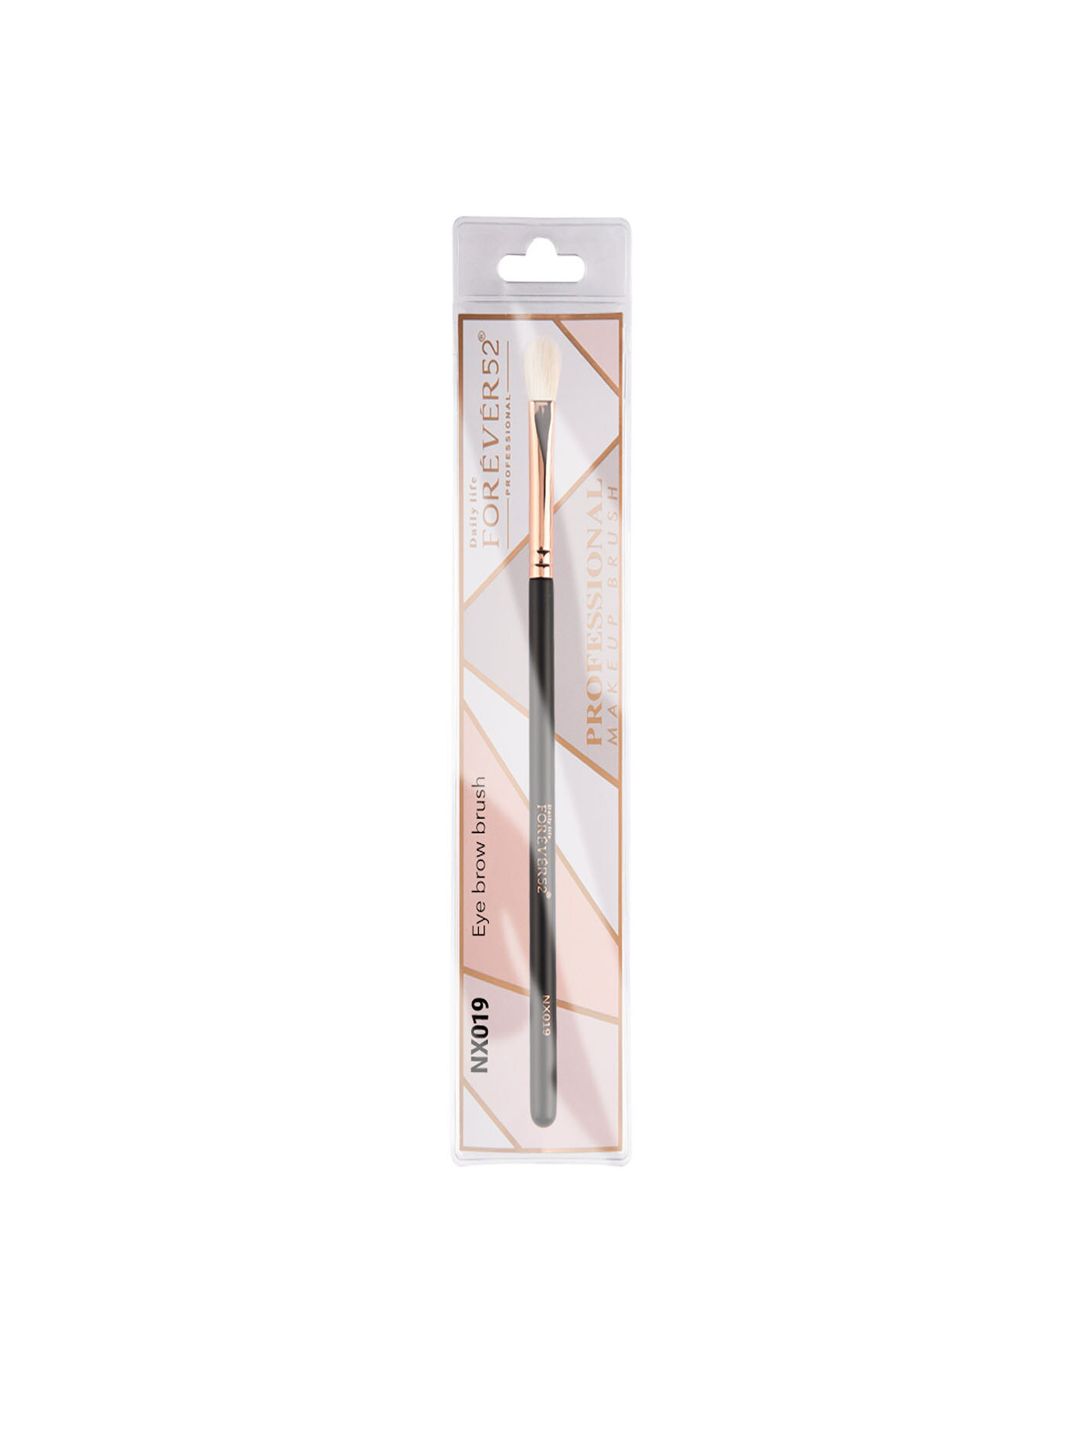 Daily Life Forever52 Eye shadow brush NX019 Price in India